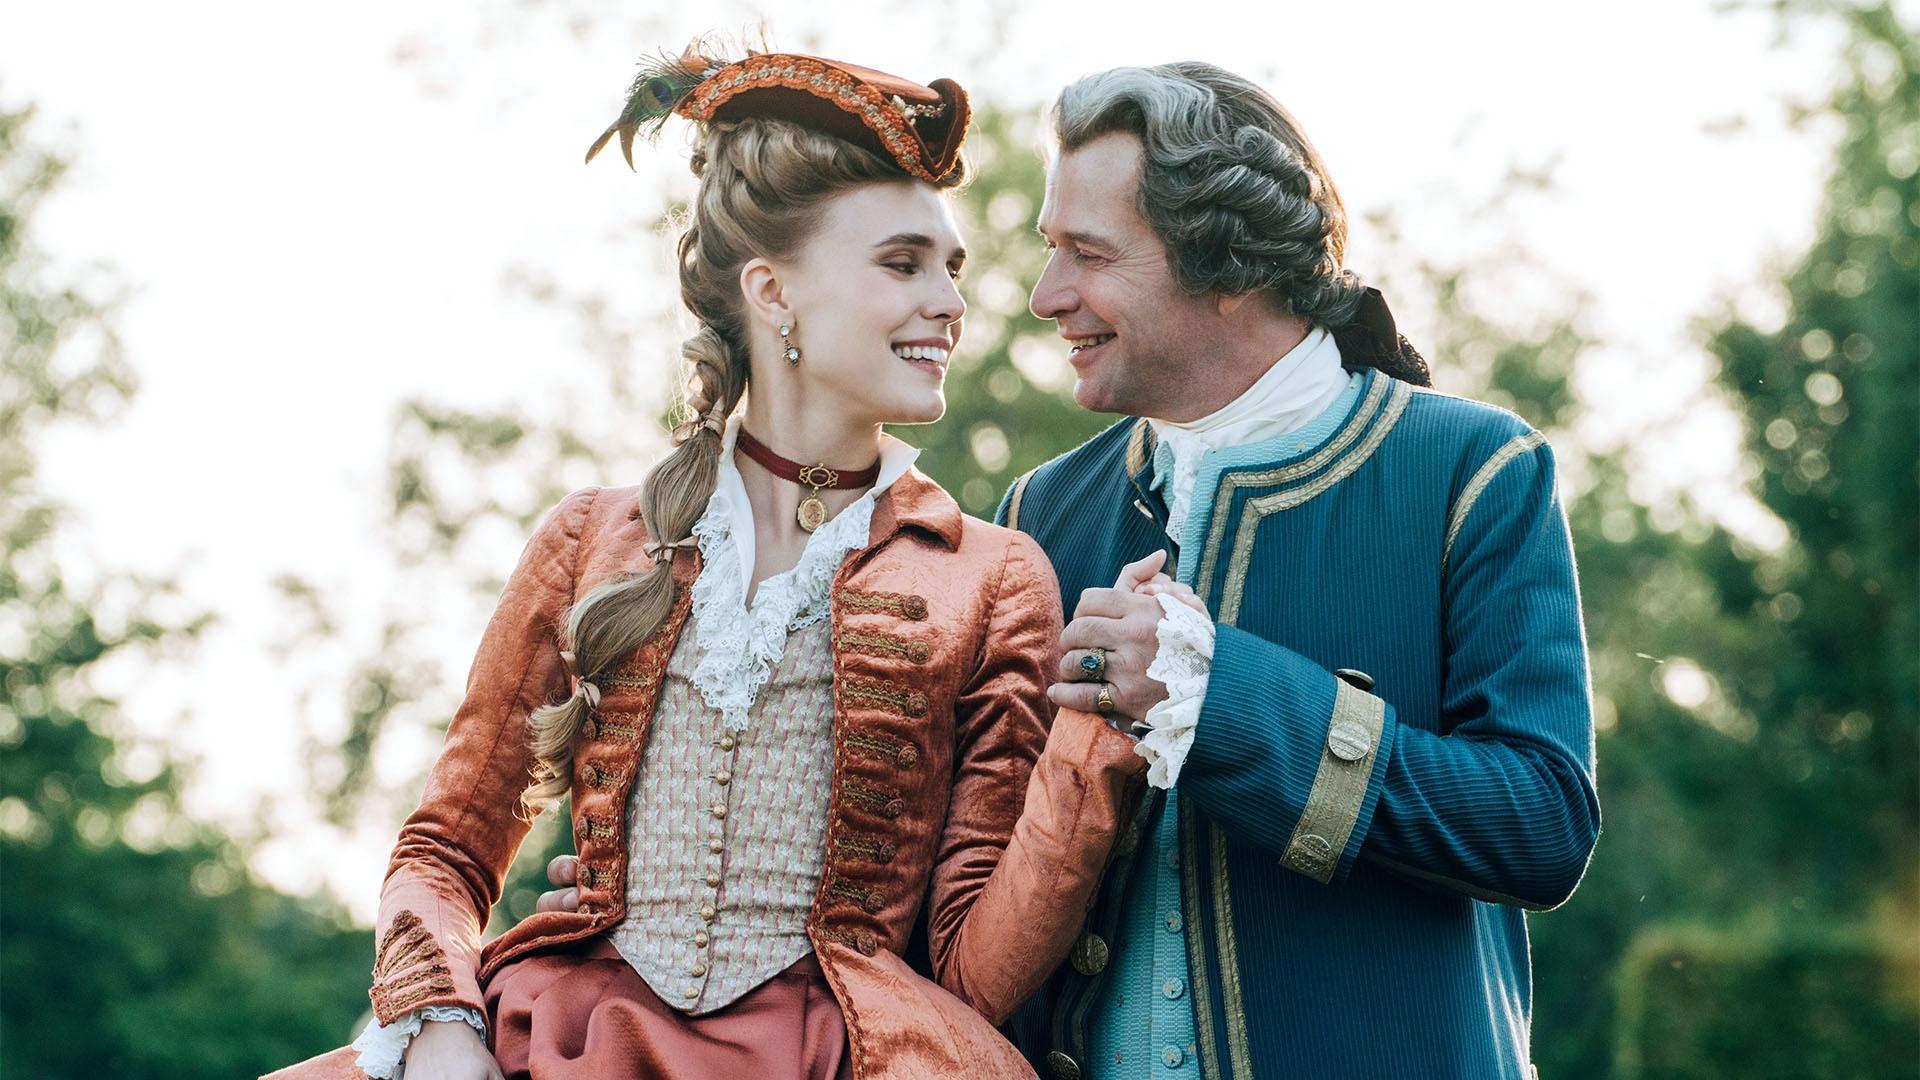 Image of Madame Du Barry played by Gaia Weiss and the king played by James Purefoy